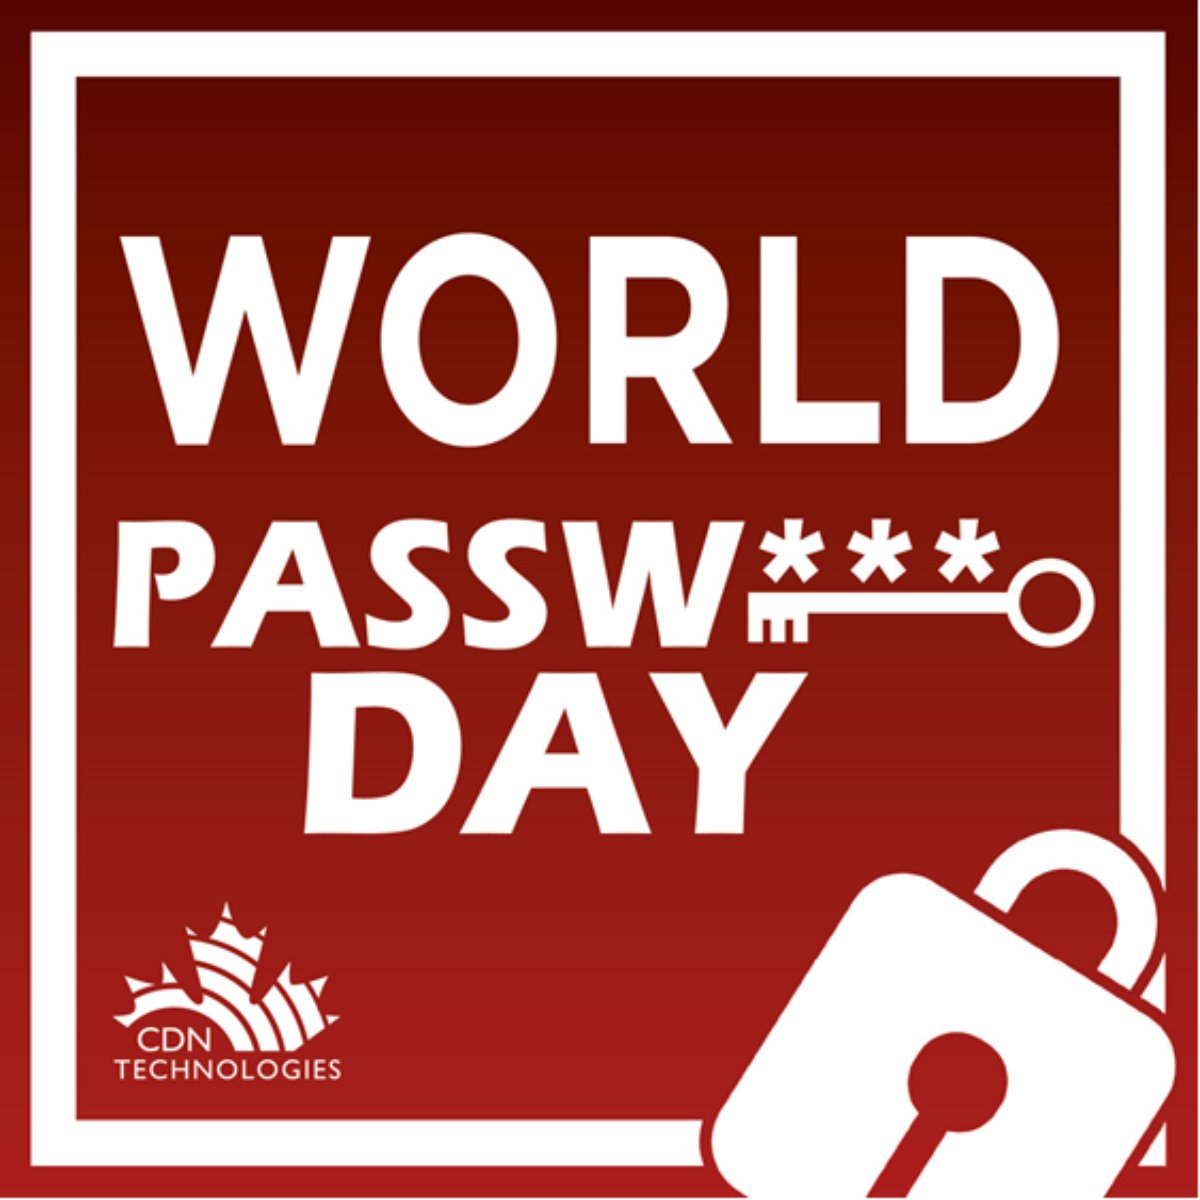 🔑 Review your passwords: Are they long, unique, and complex? Avoid reuse across sites. 🔐 Enable two-factor authentication for extra security. 🛡️ Enhance your protection with our comprehensive services. #PasswordManagement #WorldPasswordDay #SecureYourData 🌐💪